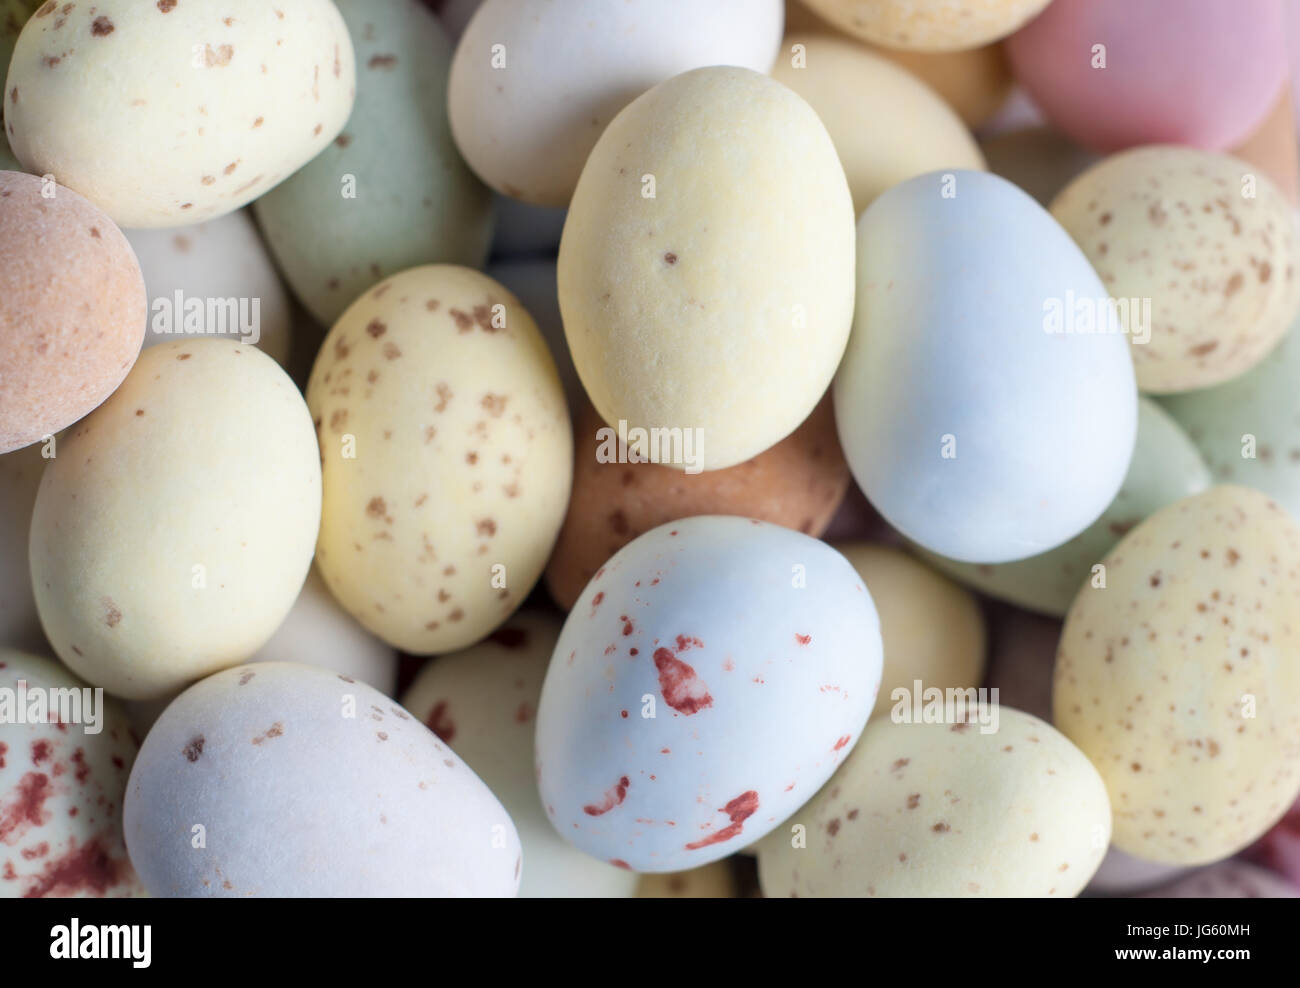 Overhead close up (macro) of a pile of Egg shaped Easter sweets (candies) in pastel shades. Stock Photo